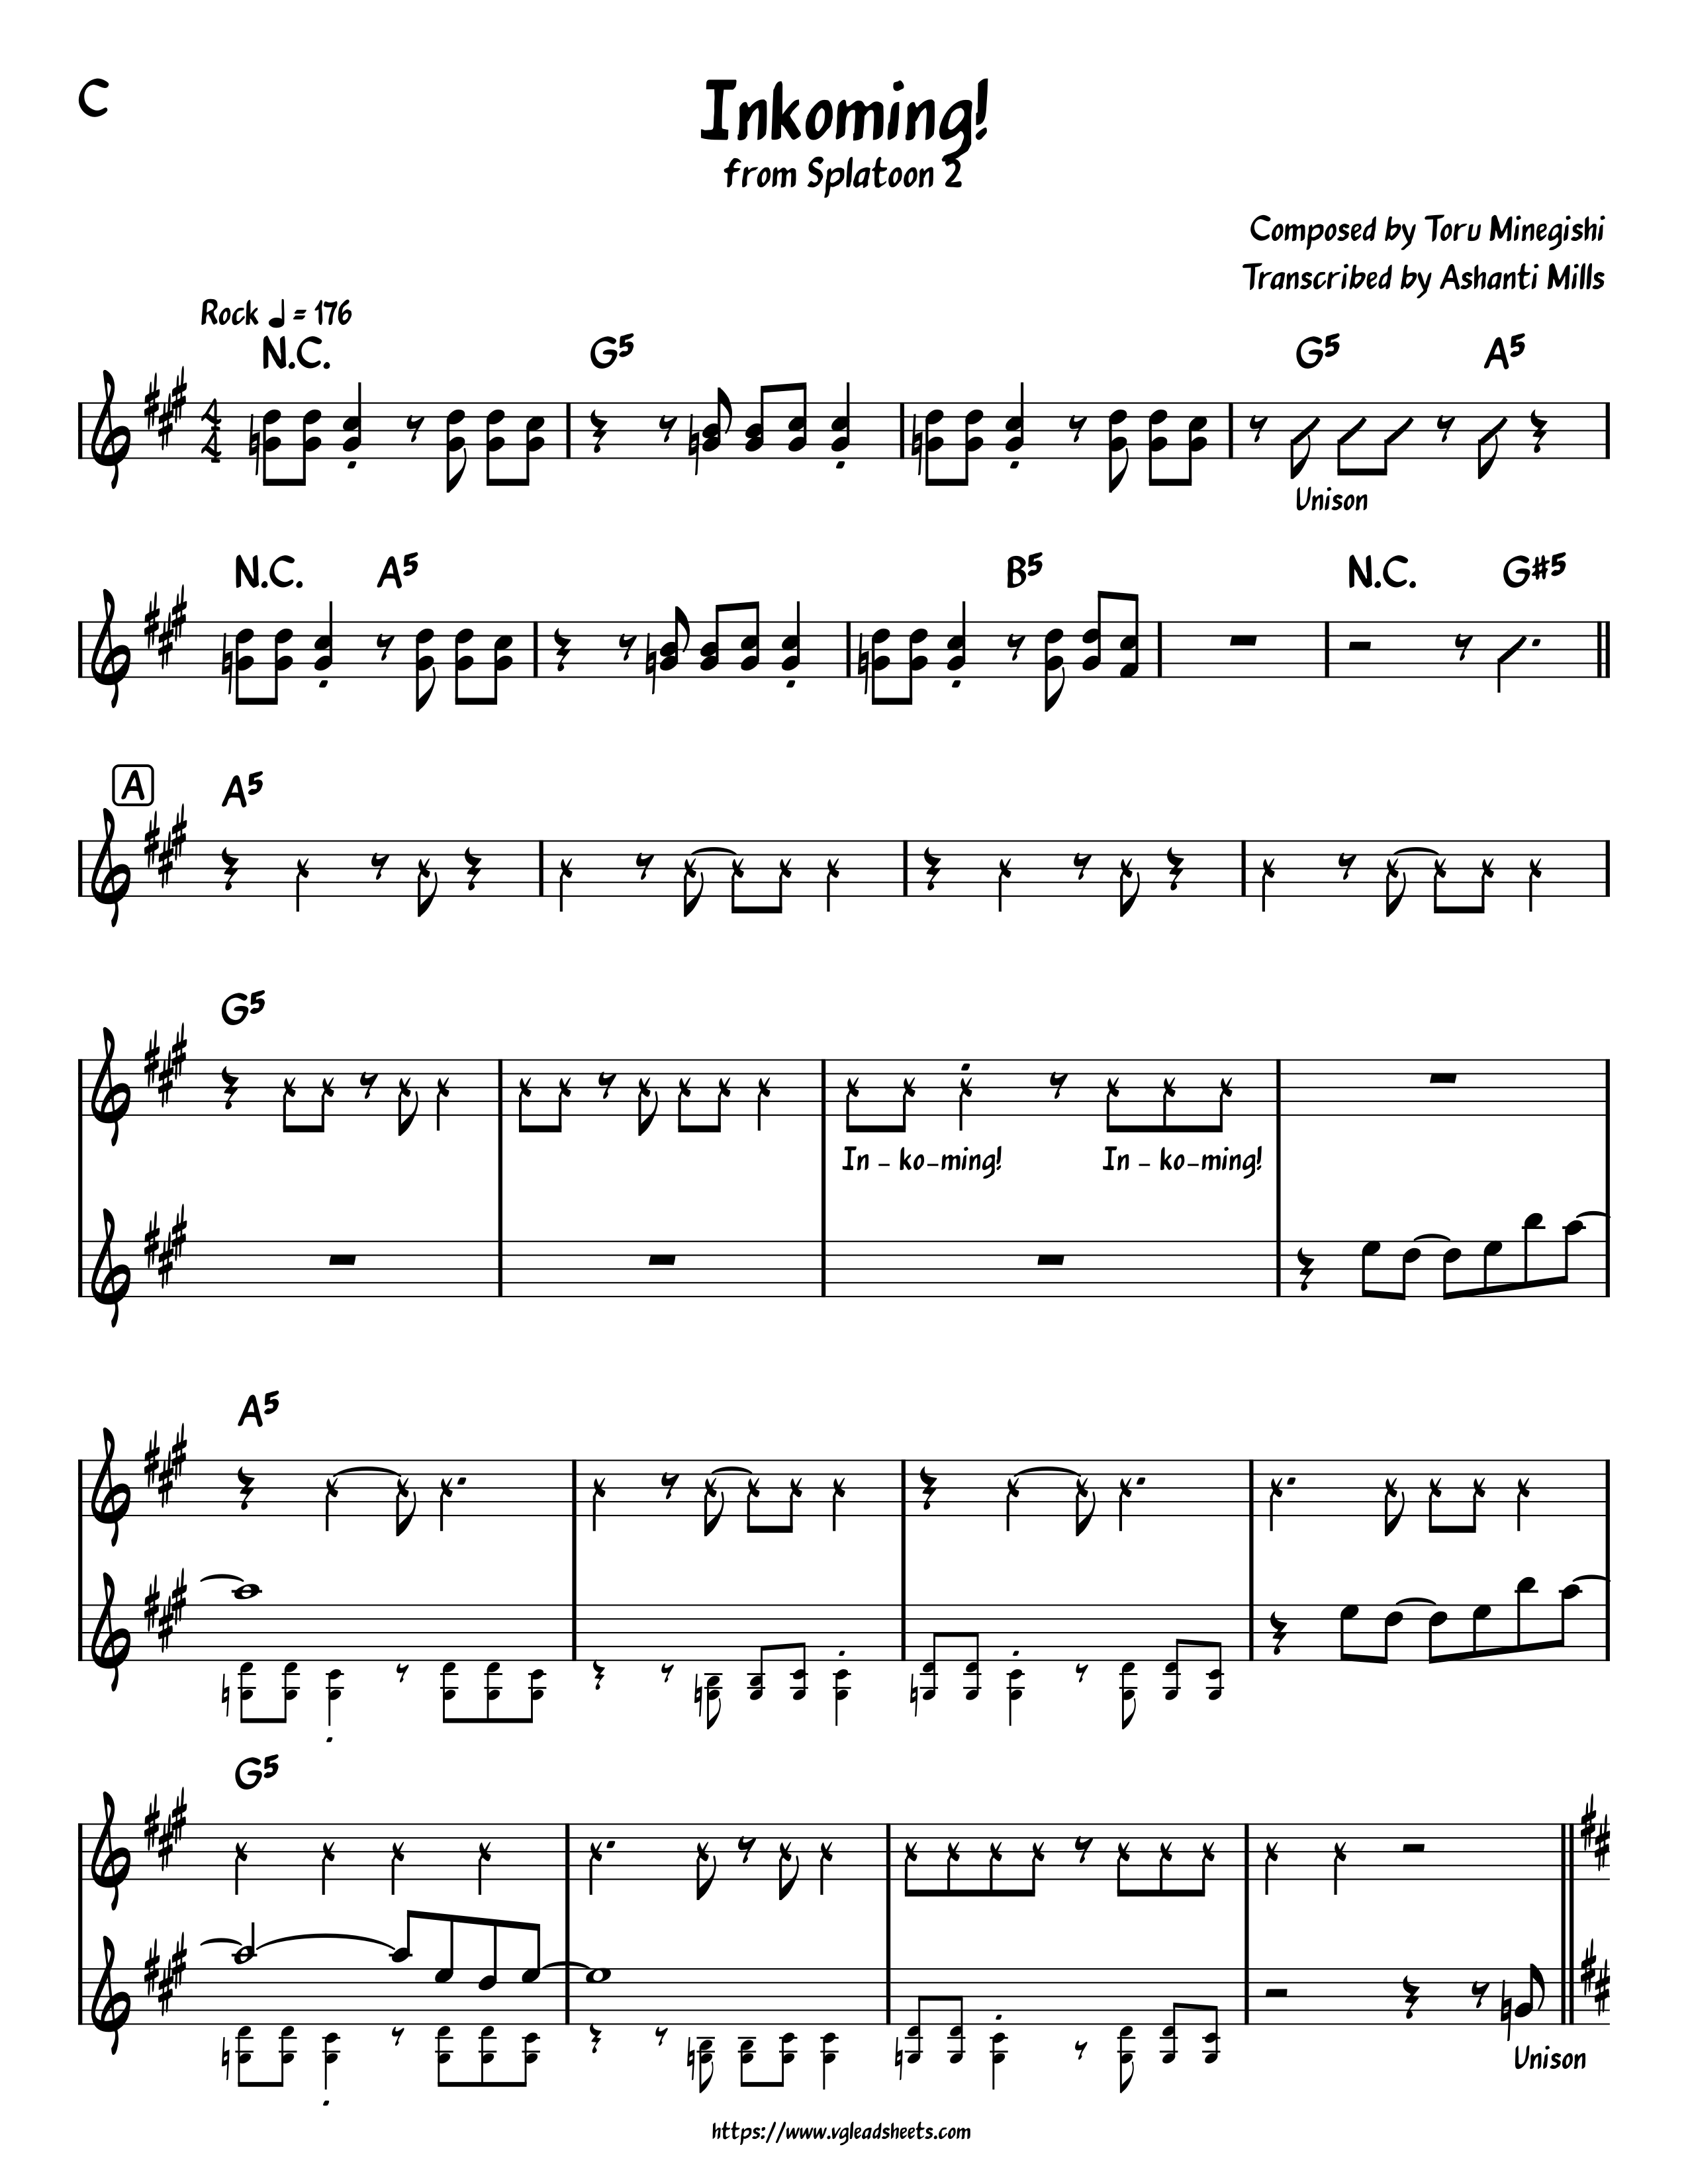 Fly or Die (Download) » Sheet Music for Clarinet